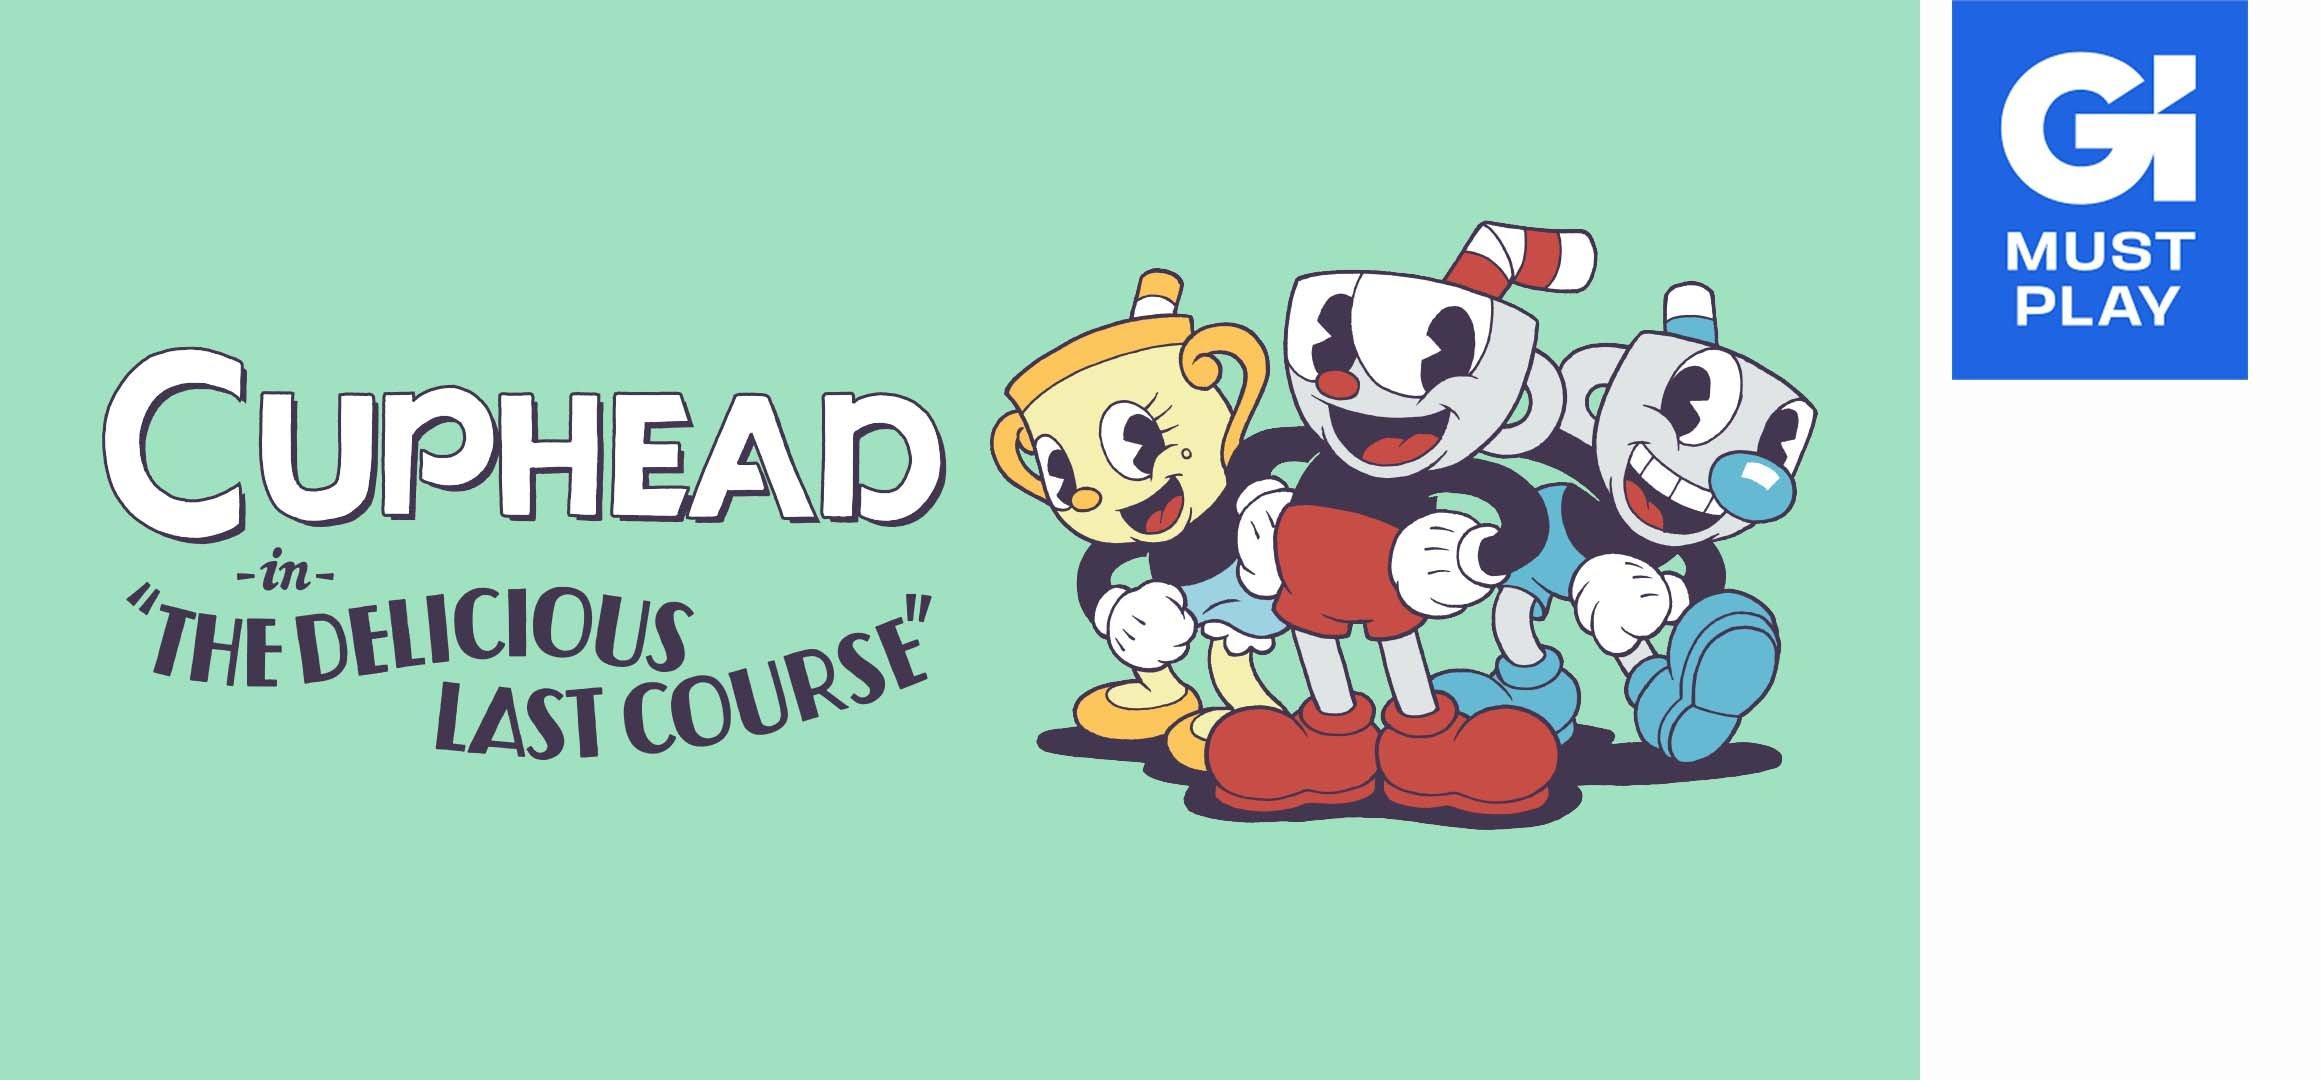 Cuphead physical edition announced for PS4, Xbox One, and Switch, includes  DLC 'The Delicious Last Course' - Gematsu